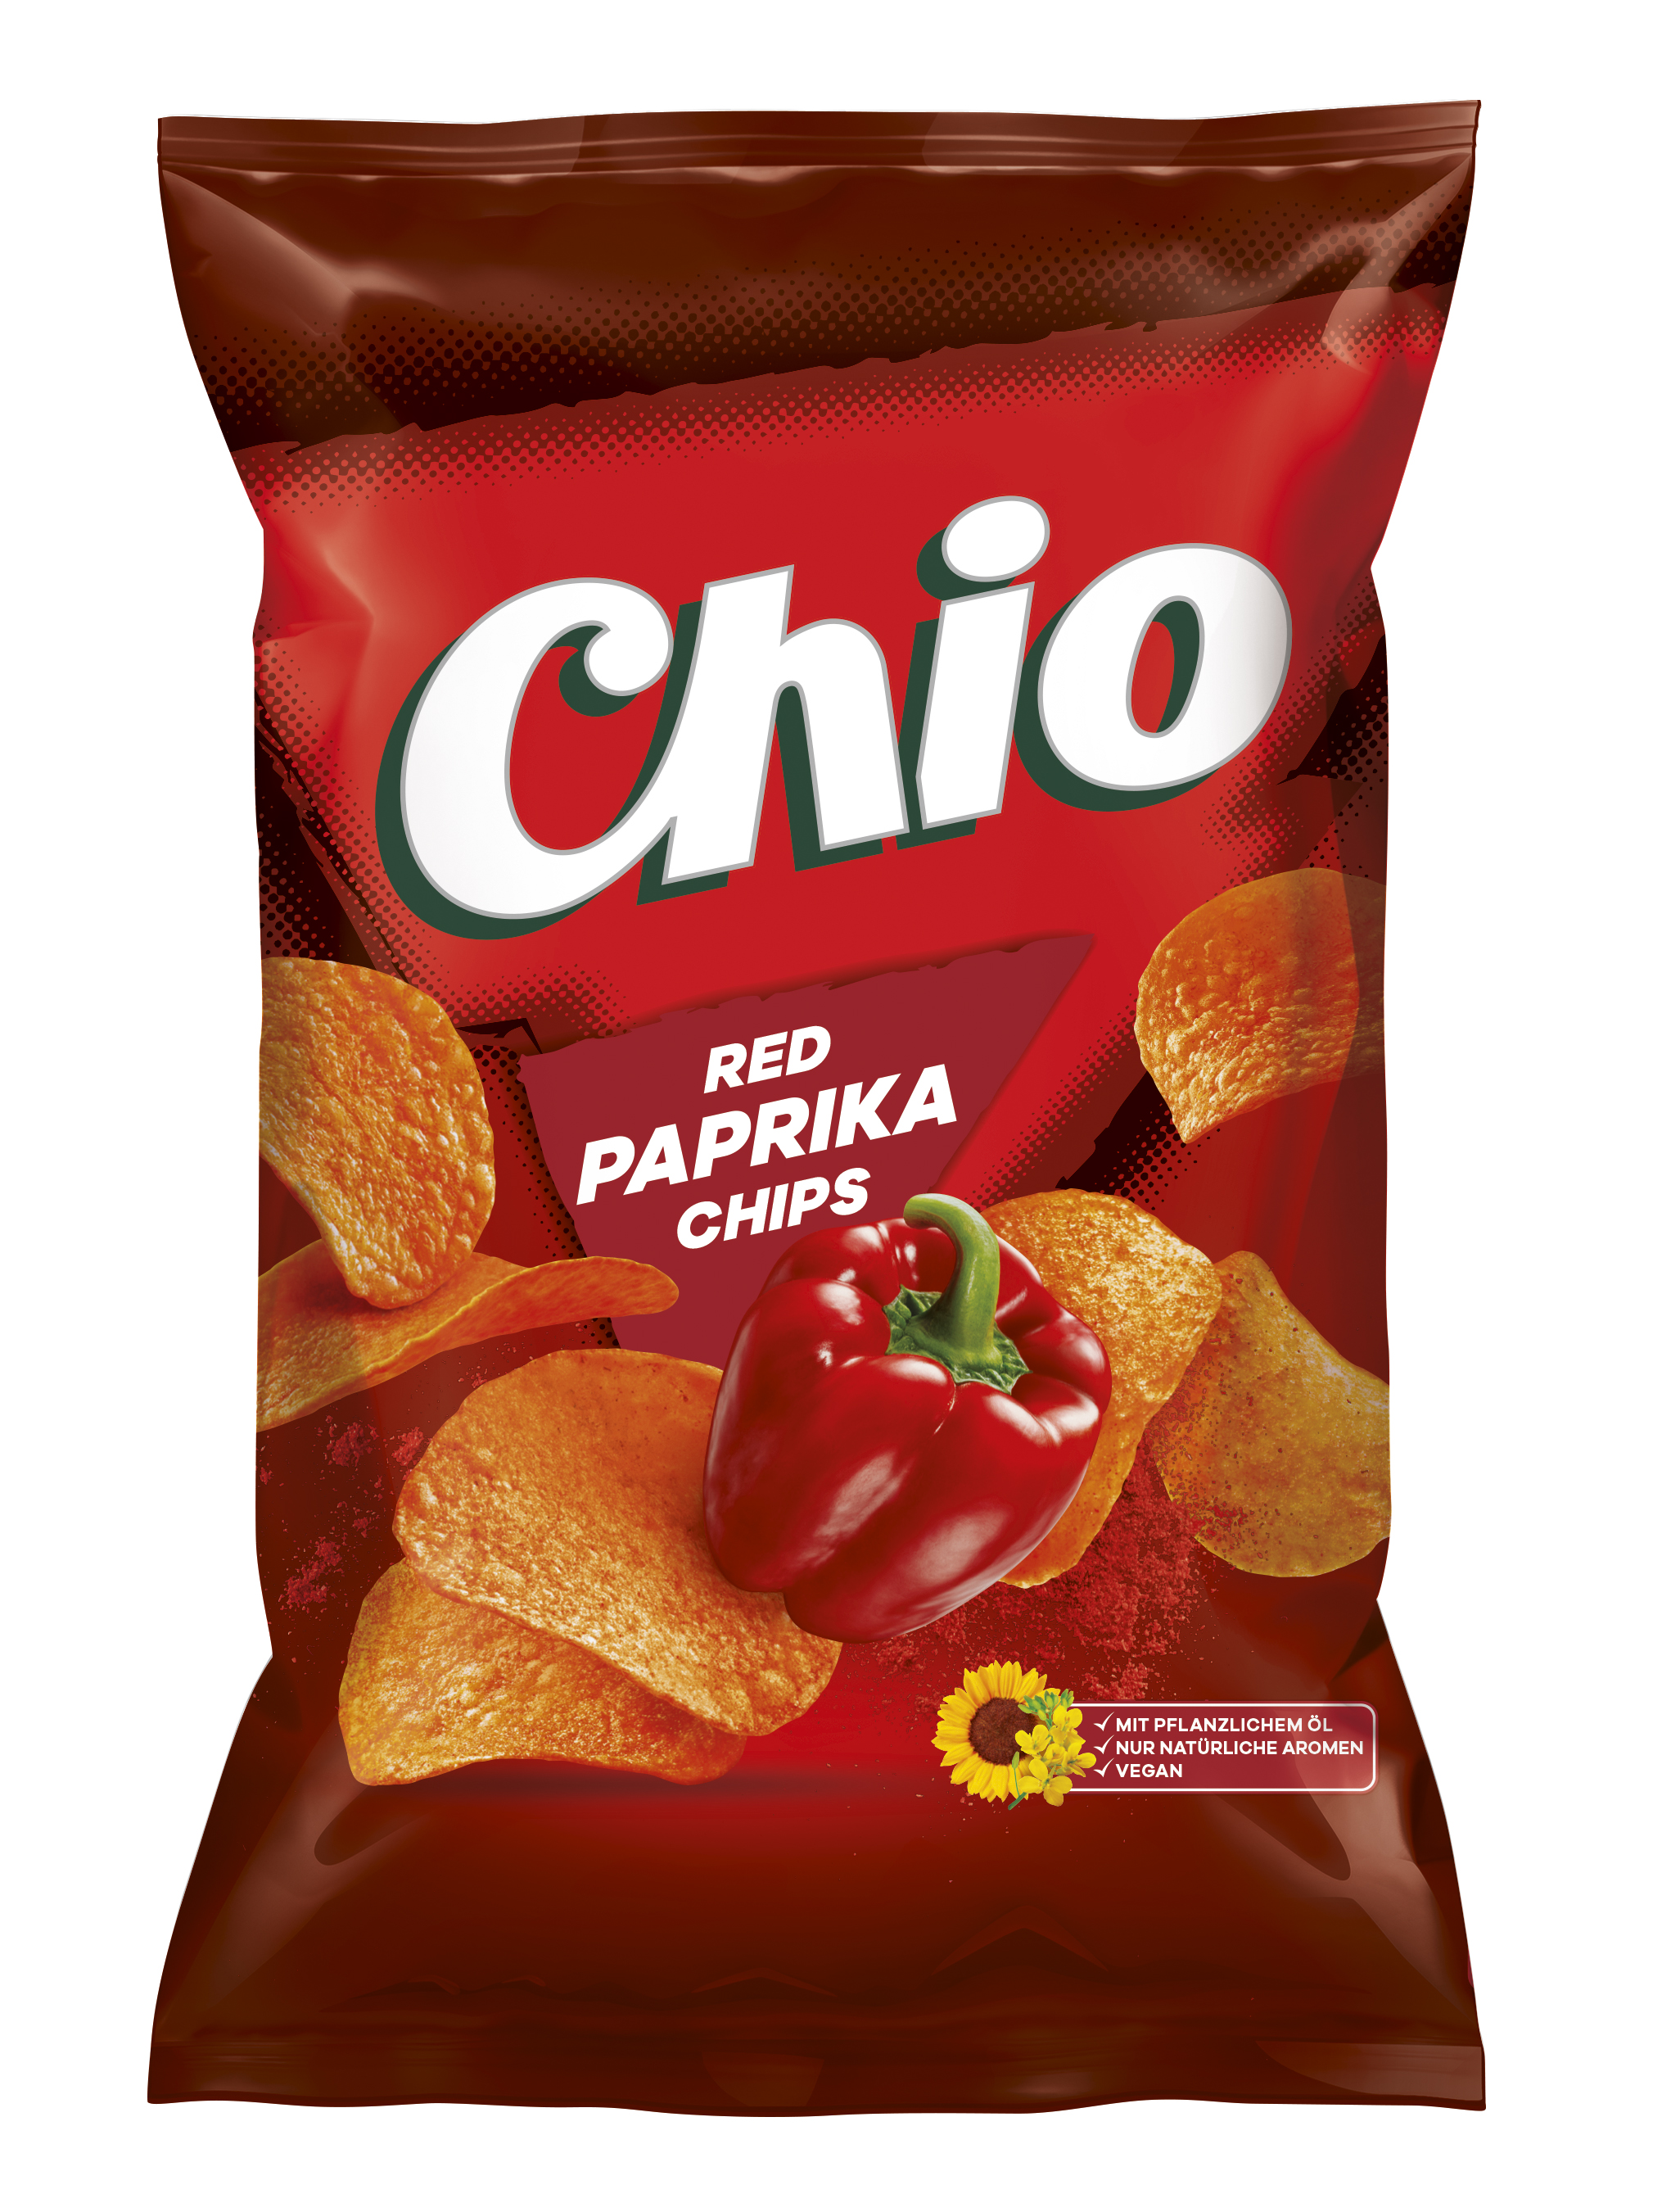 Chio Chips Red Paprika 150g